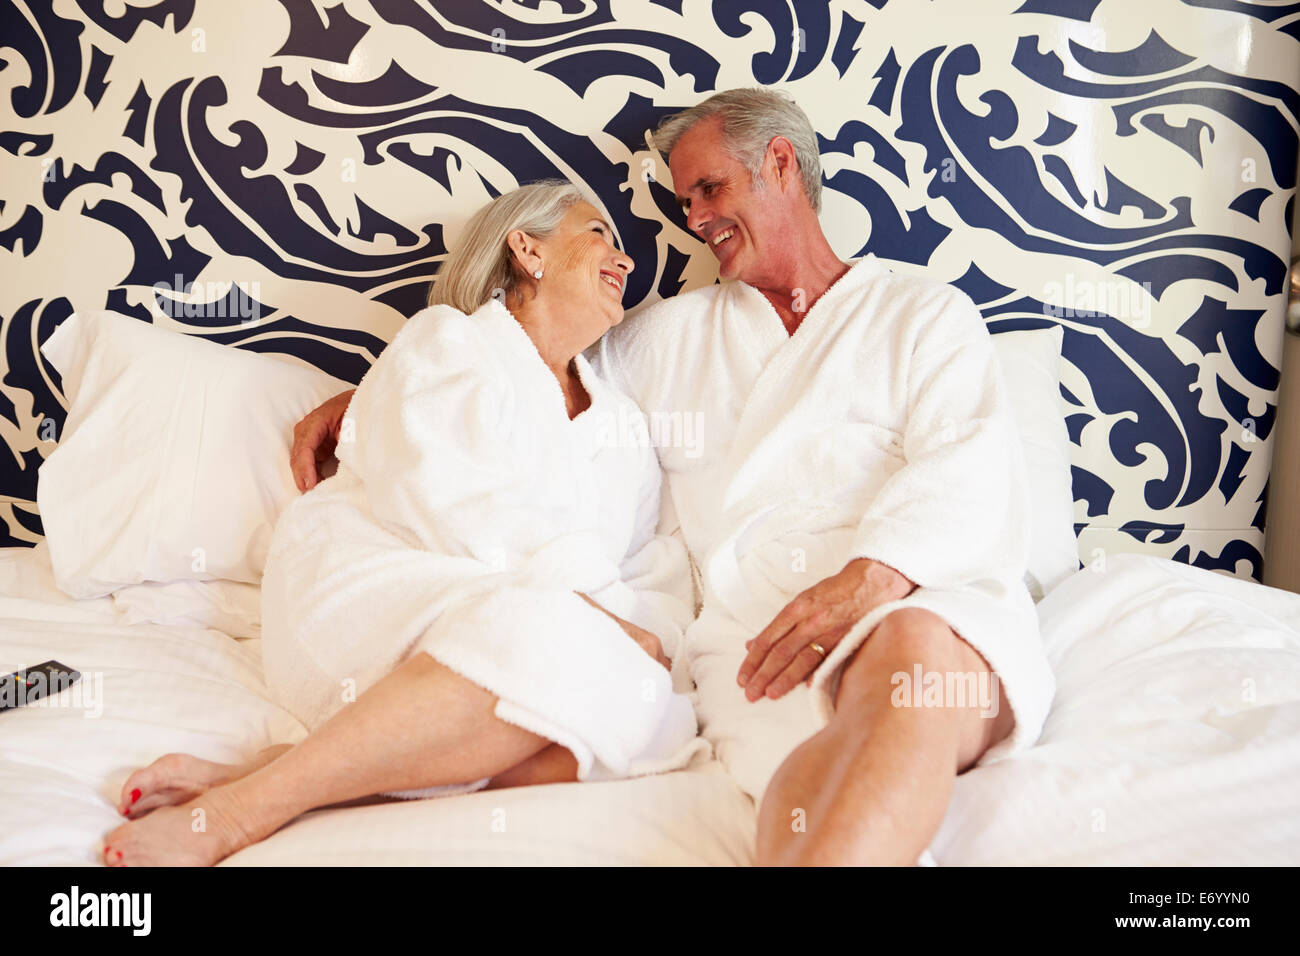 Senior Couple Relaxing In Hotel Room Banque D'Images